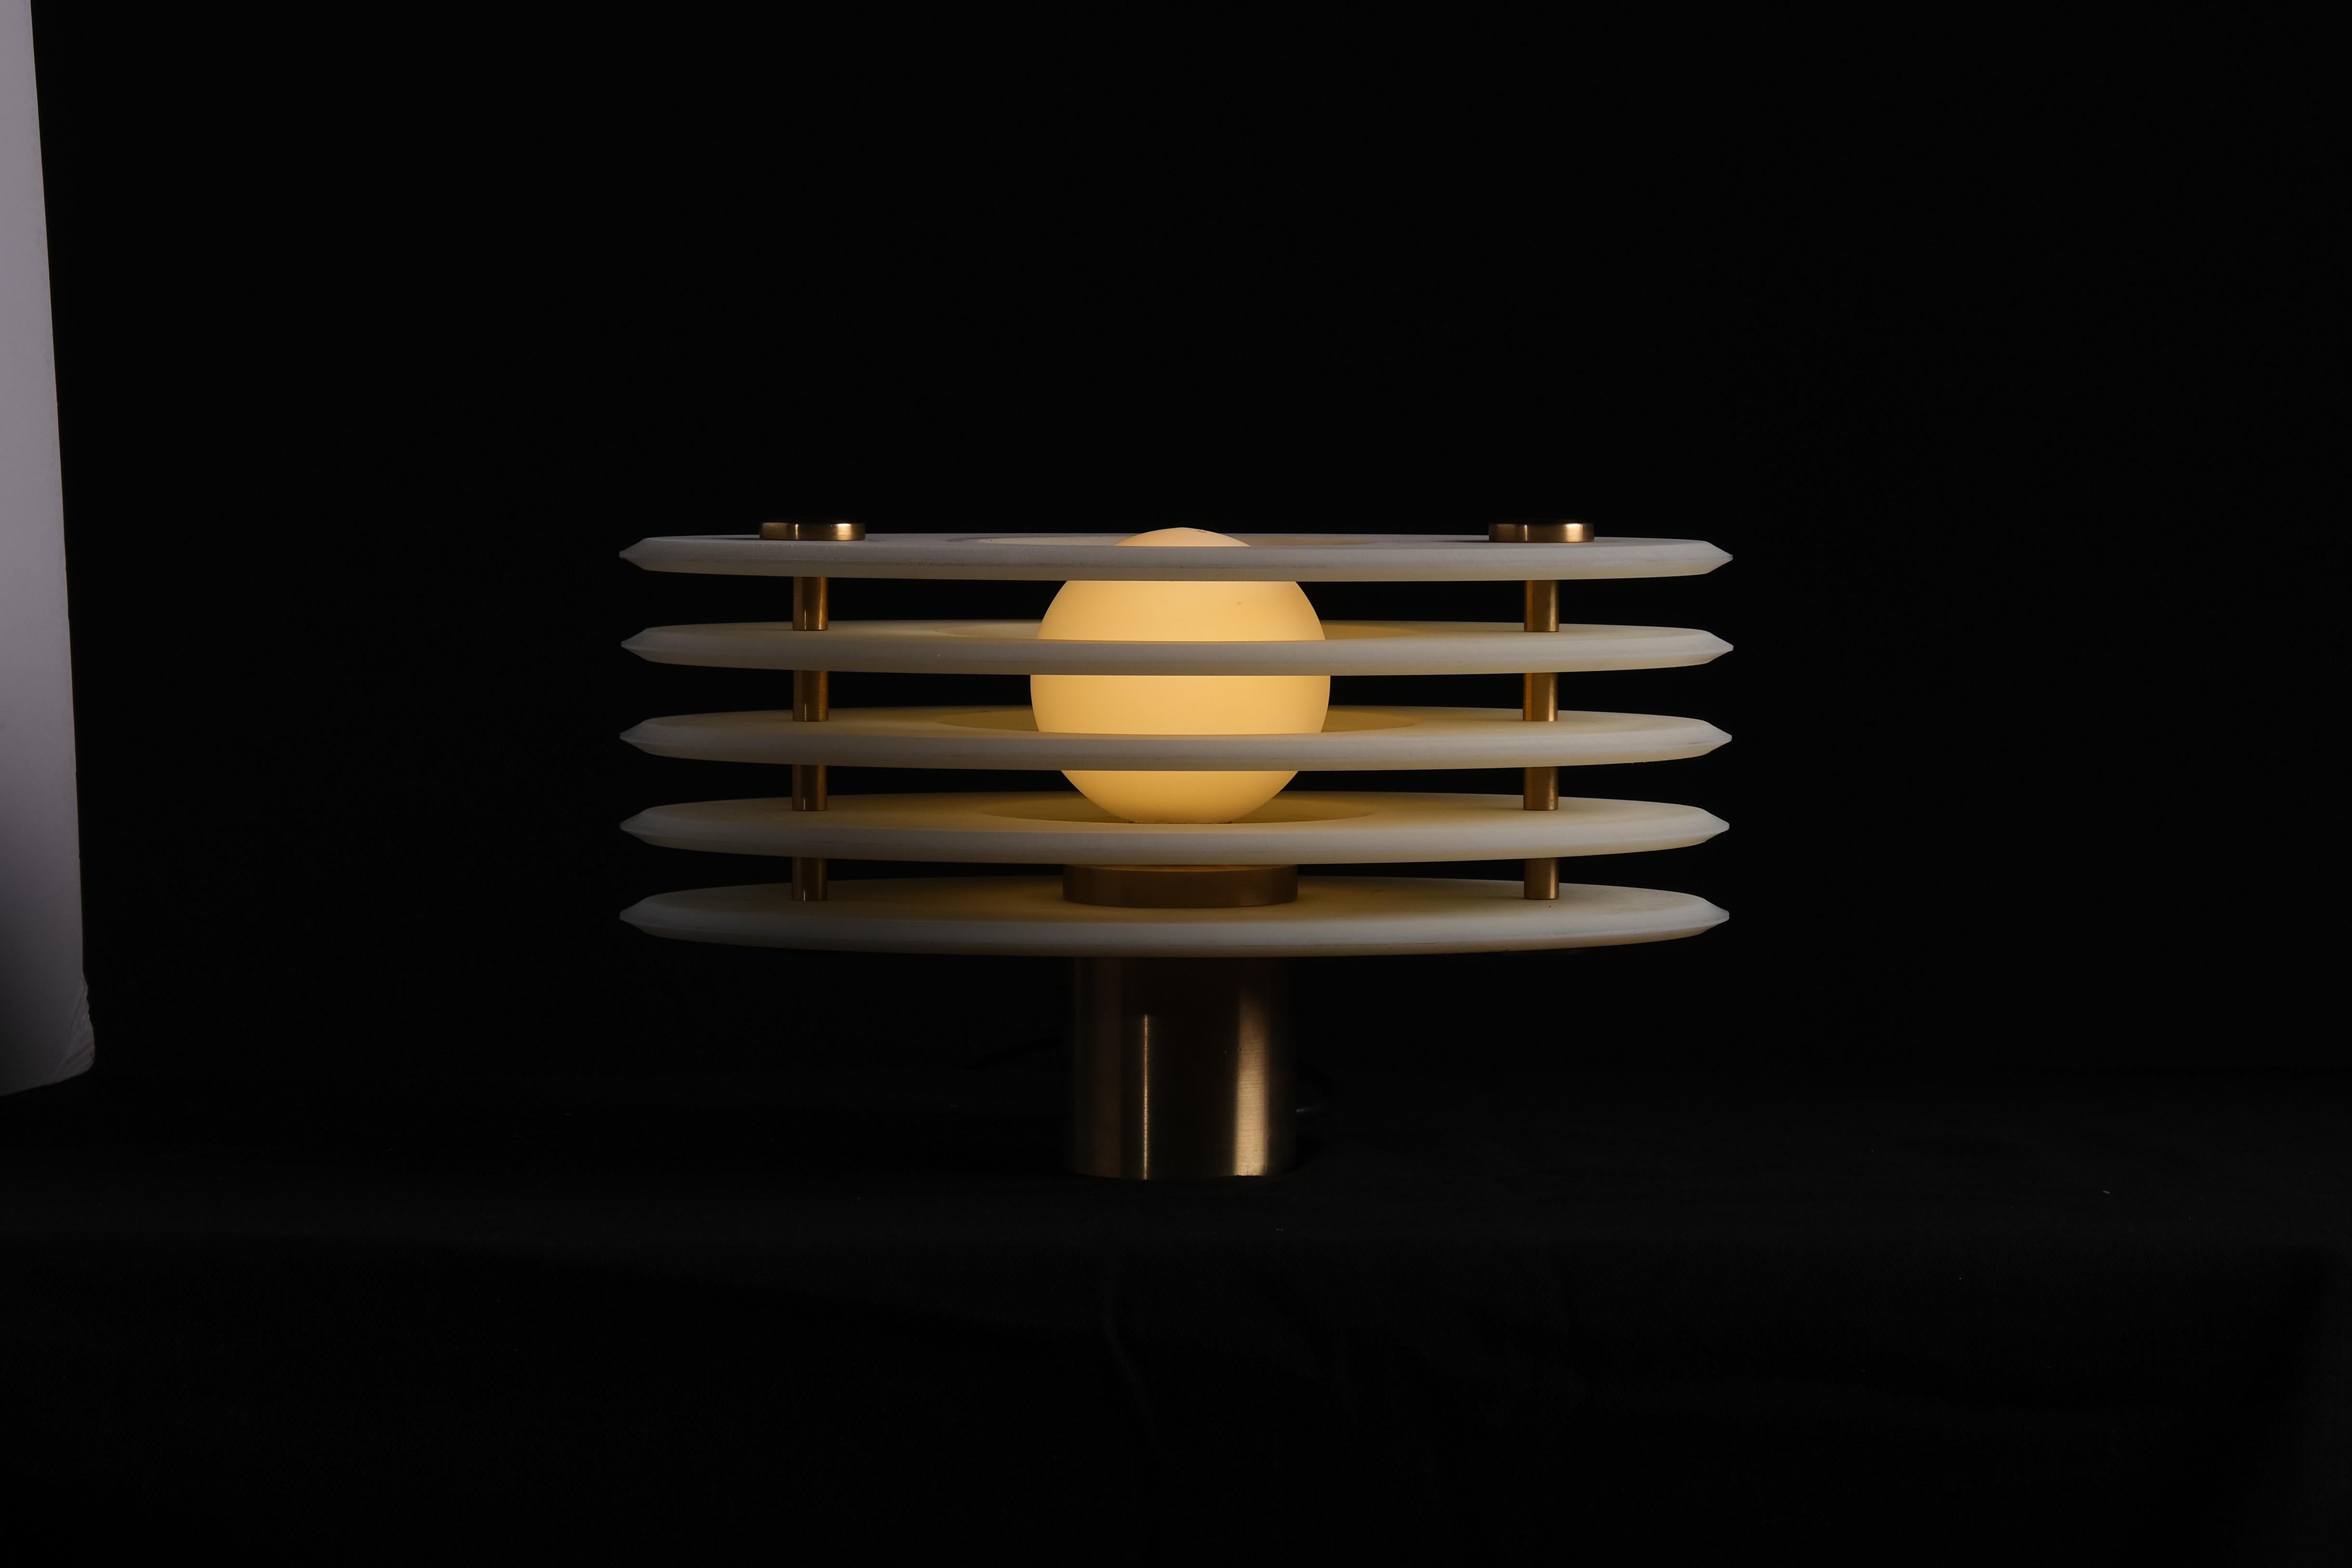 Table lamp 03 by Adam Caplowe for VIDIVIXI
Dimensions: L30 x W18 x H25 cm
Materials: Brass,Resin, Glass

All our lamps can be wired according to each country. If sold to the USA it will be wired for the USA for instance.

Adam Caplowe,